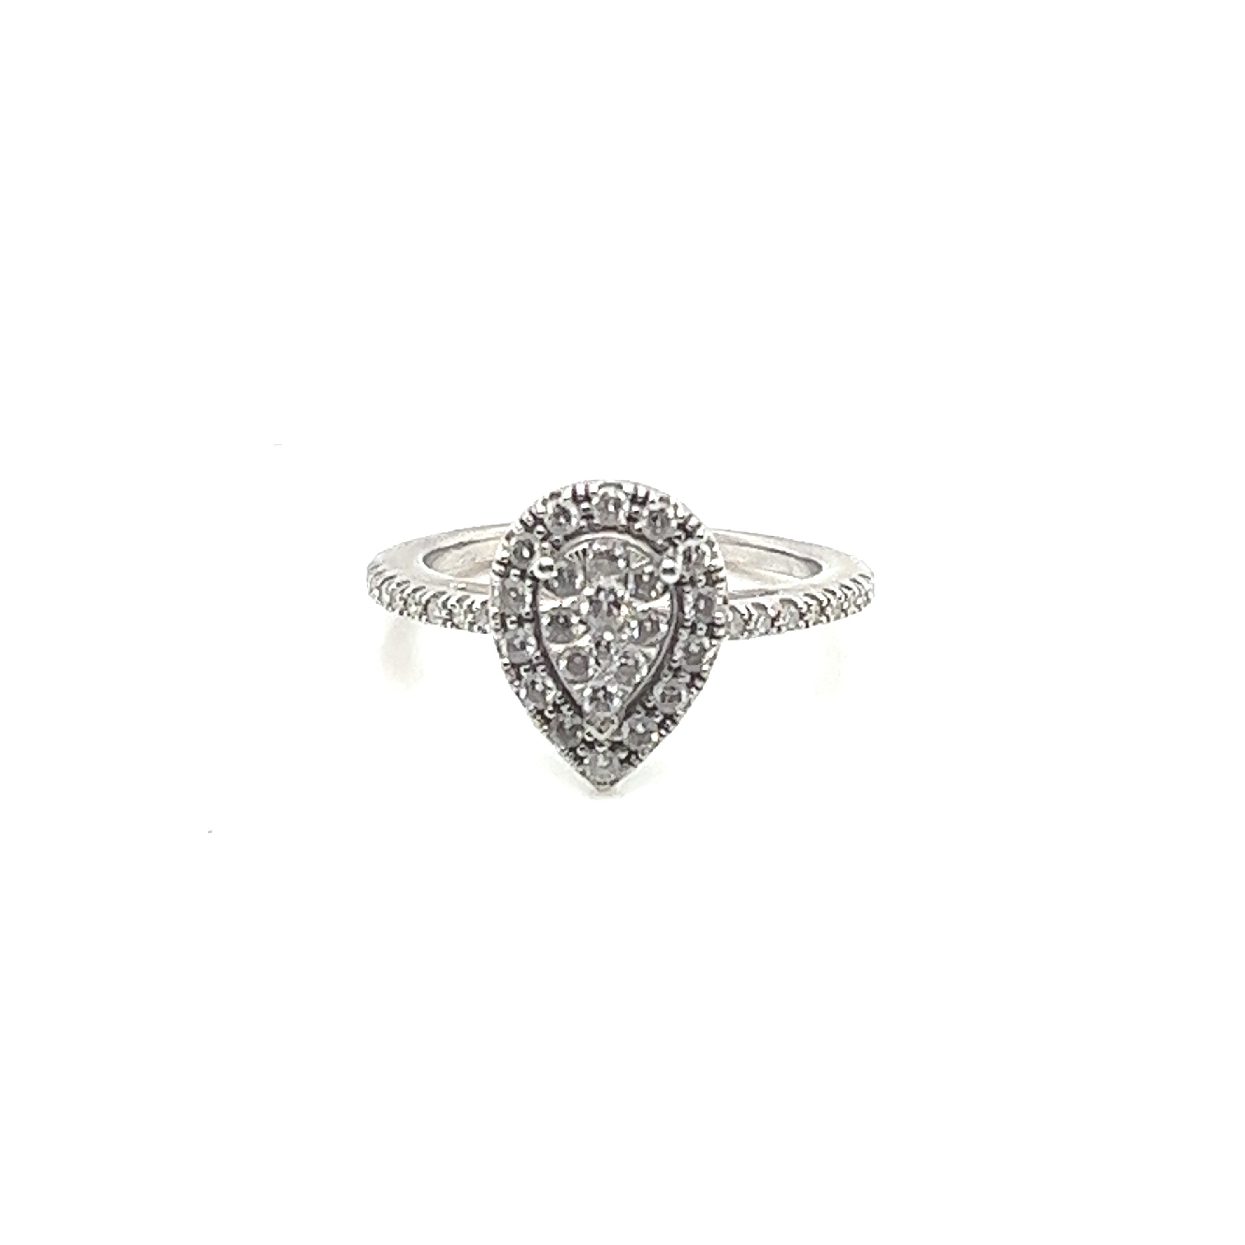 10K White Gold Pear Shaped Diamond Cluster Engagement Ring 

Size 5.5 